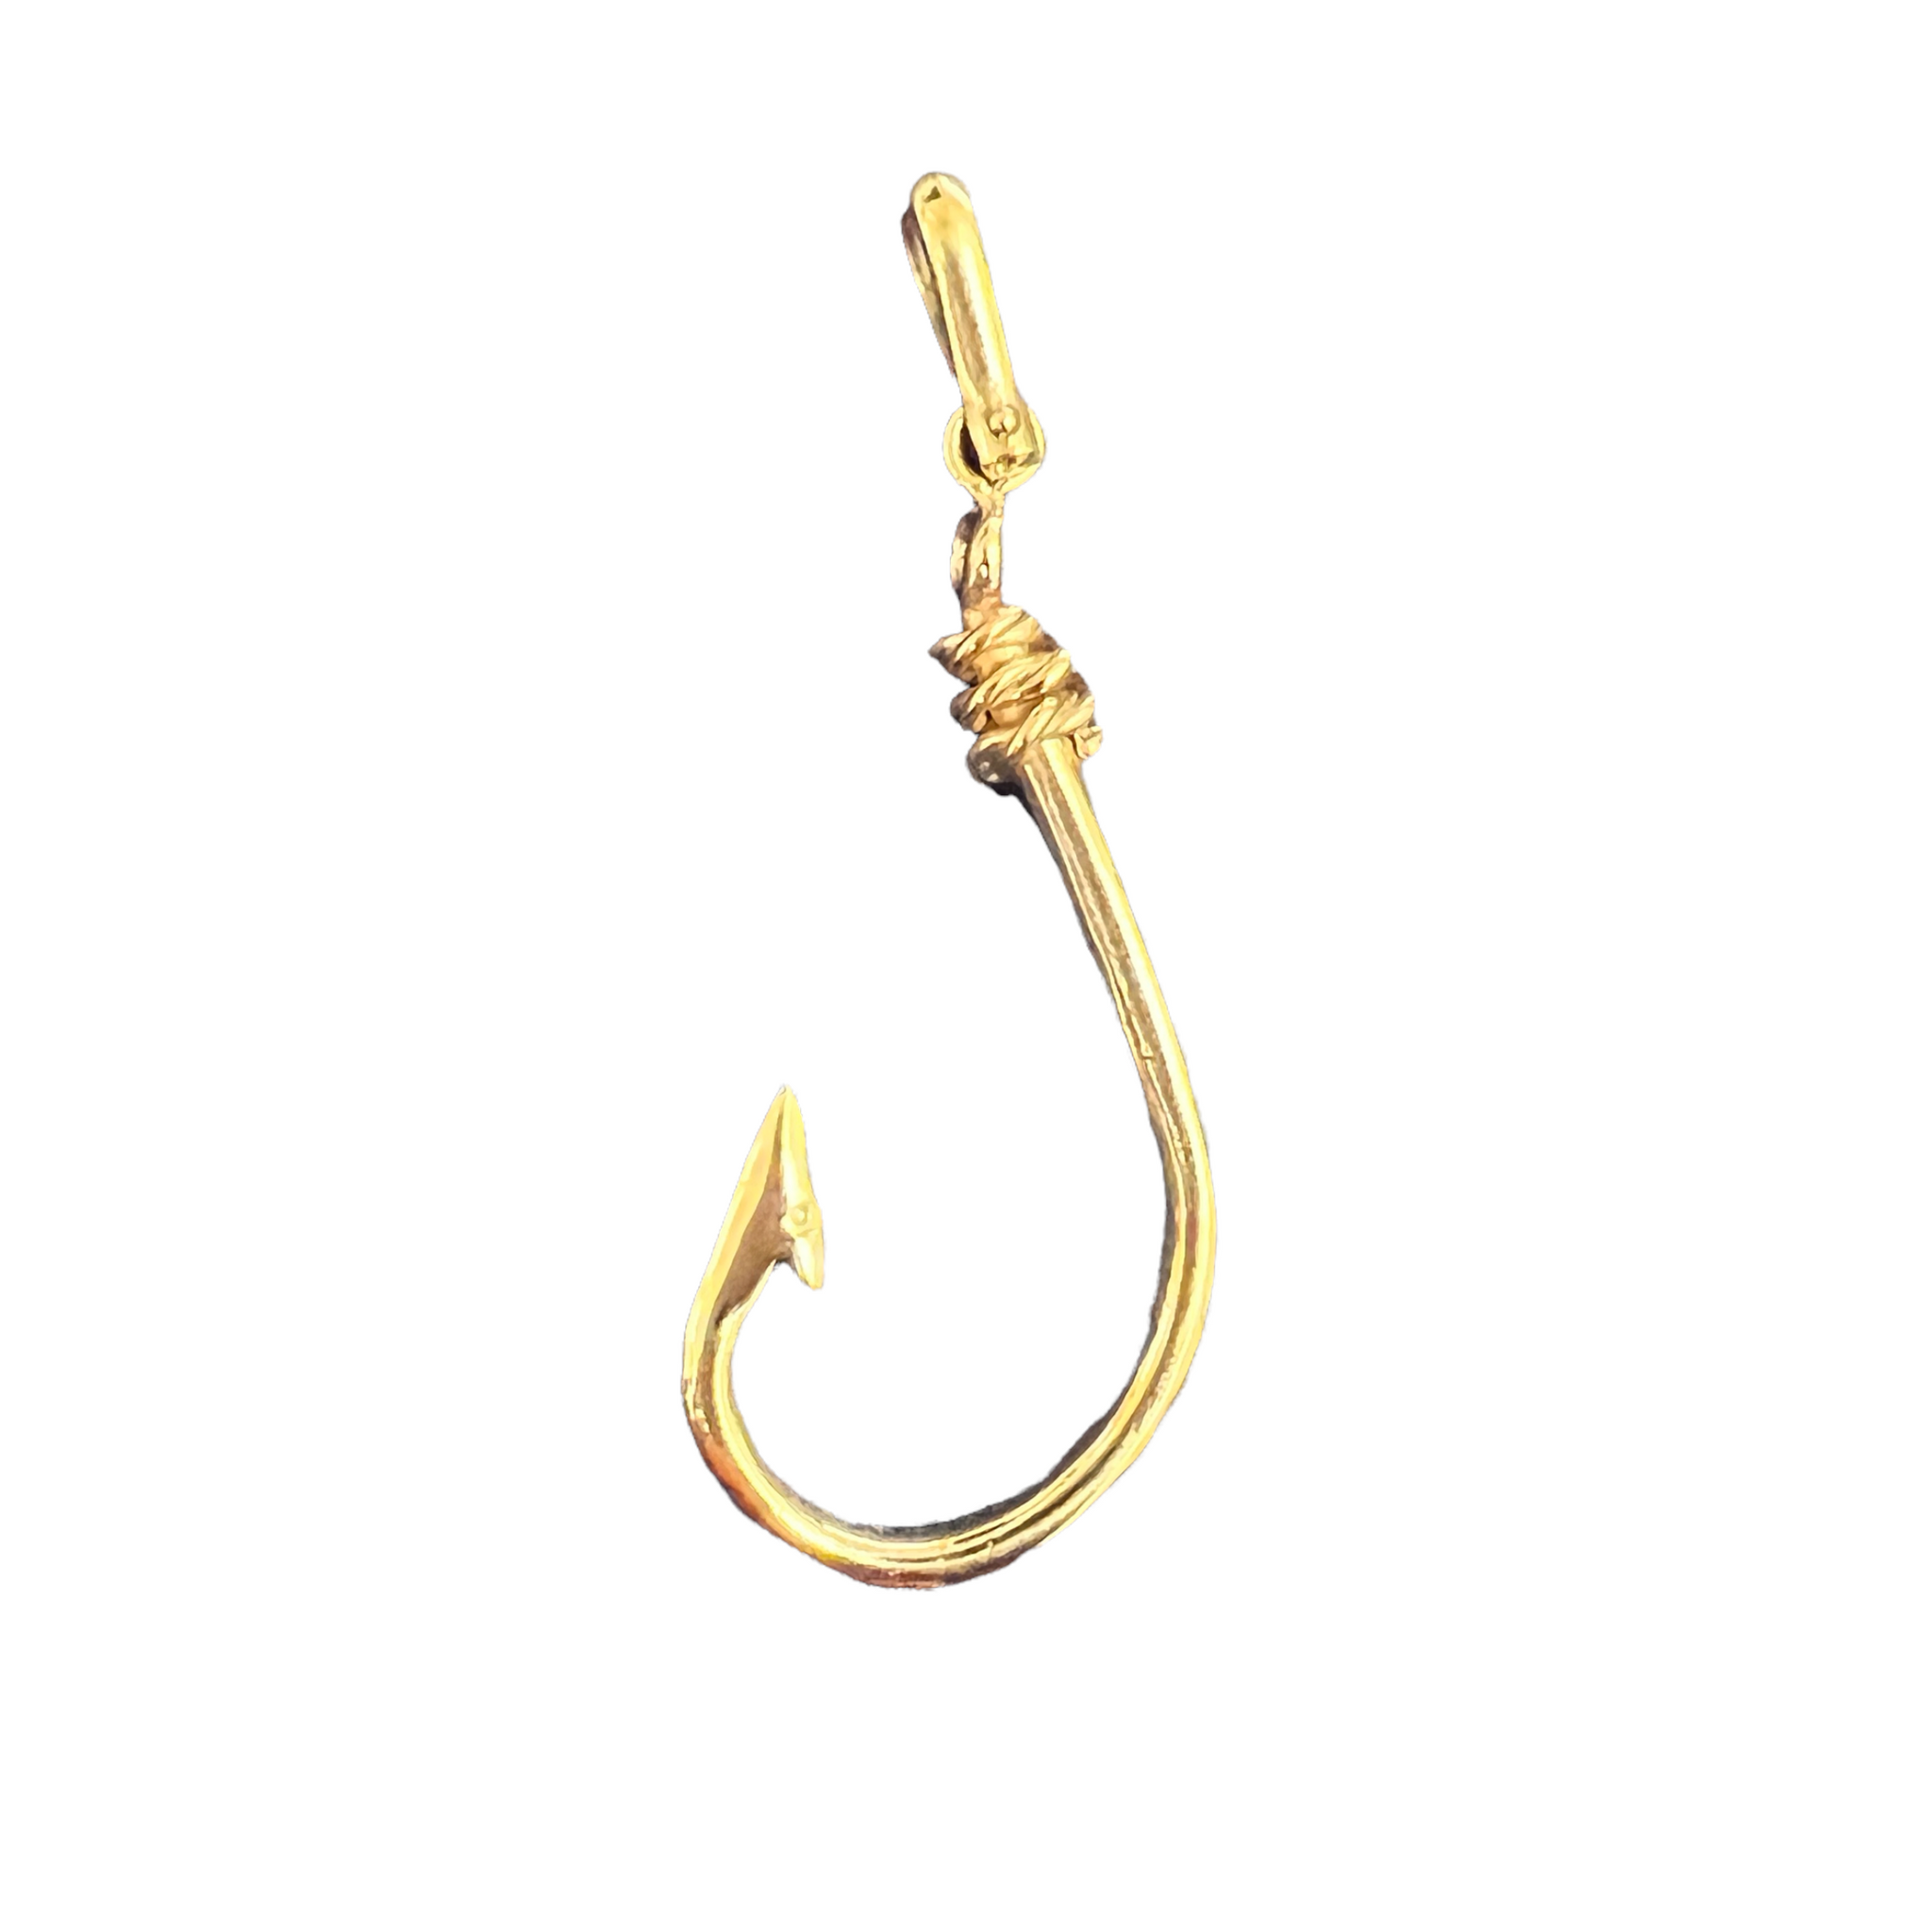 Key West fish hook pendants- Hand made here in Key West - Shipwreck  Treasures of the Keys